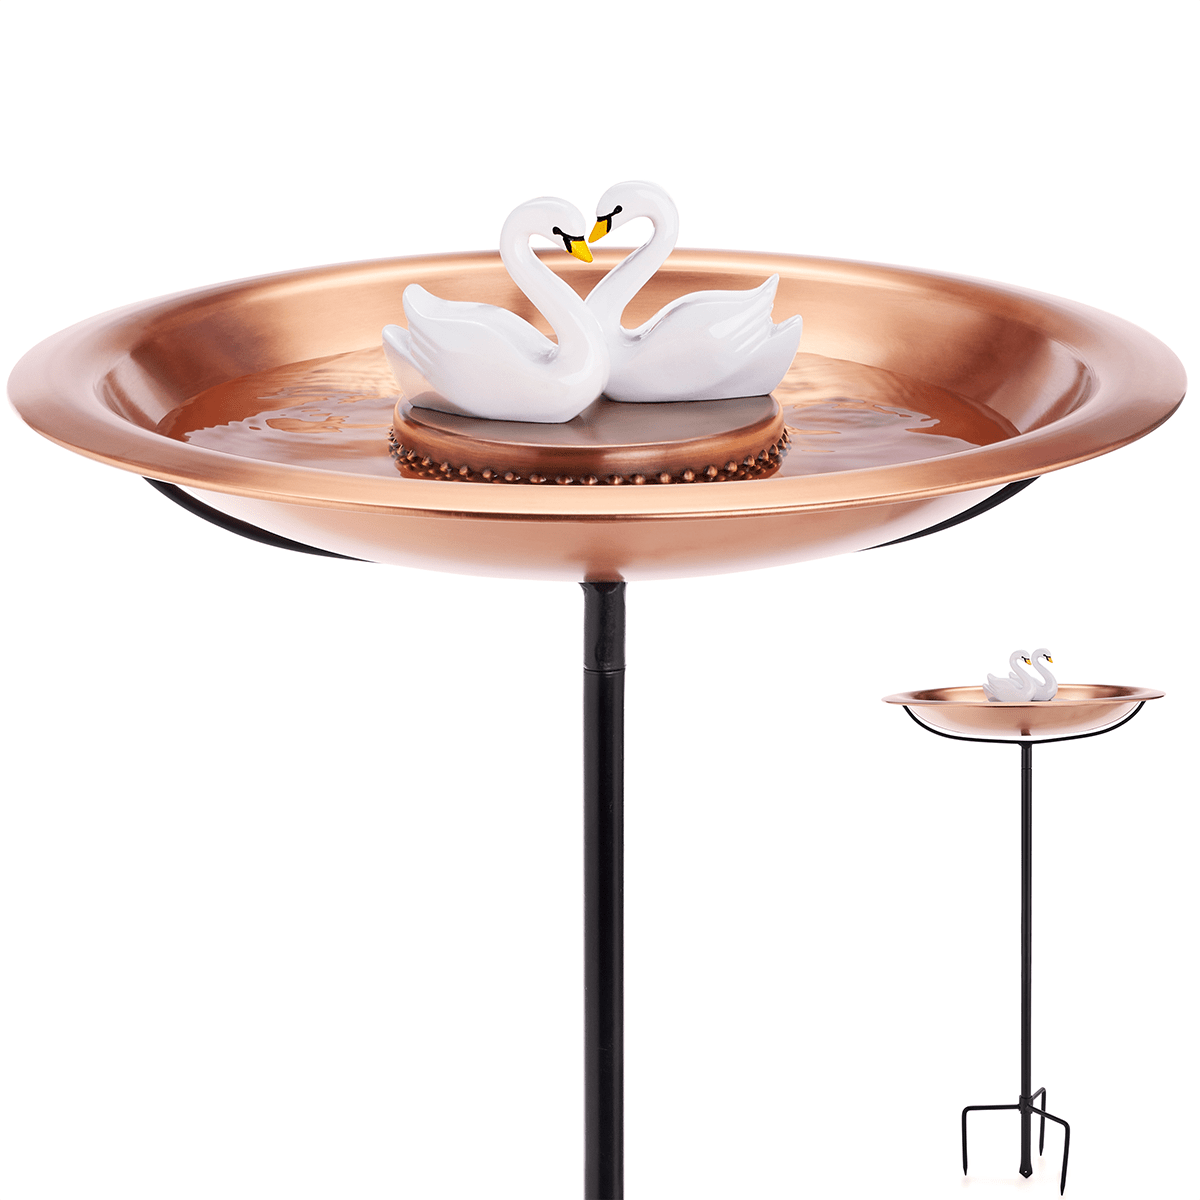 18" Matte Copper Bird Bath with Swans and Garden Pole - Good Directions